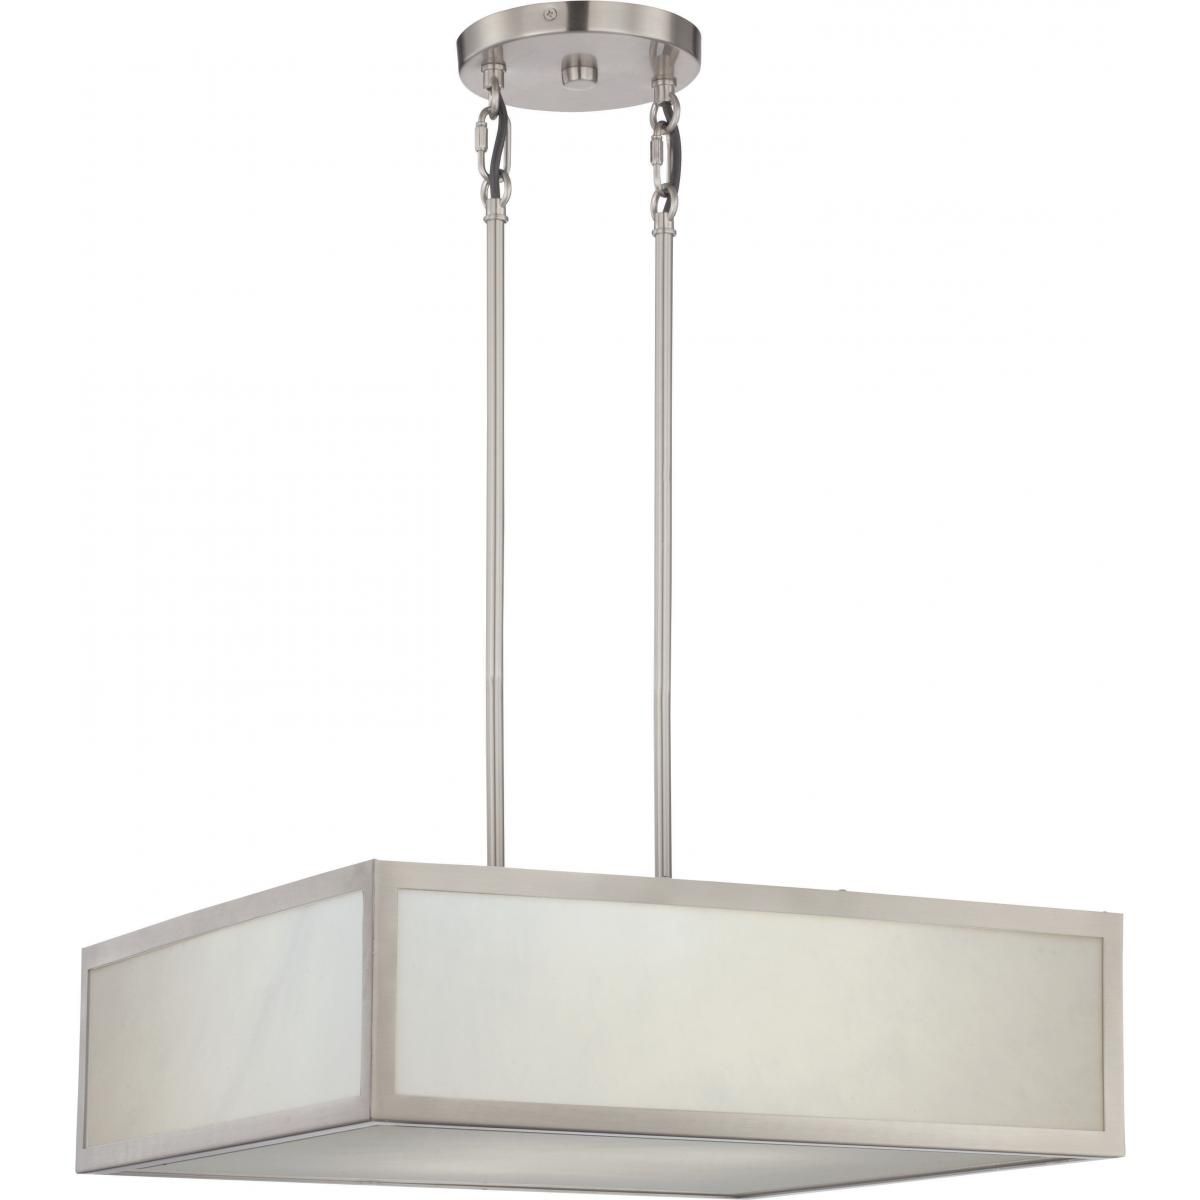 Crate 20 in. LED Pendant Light Silver Finish - Bees Lighting